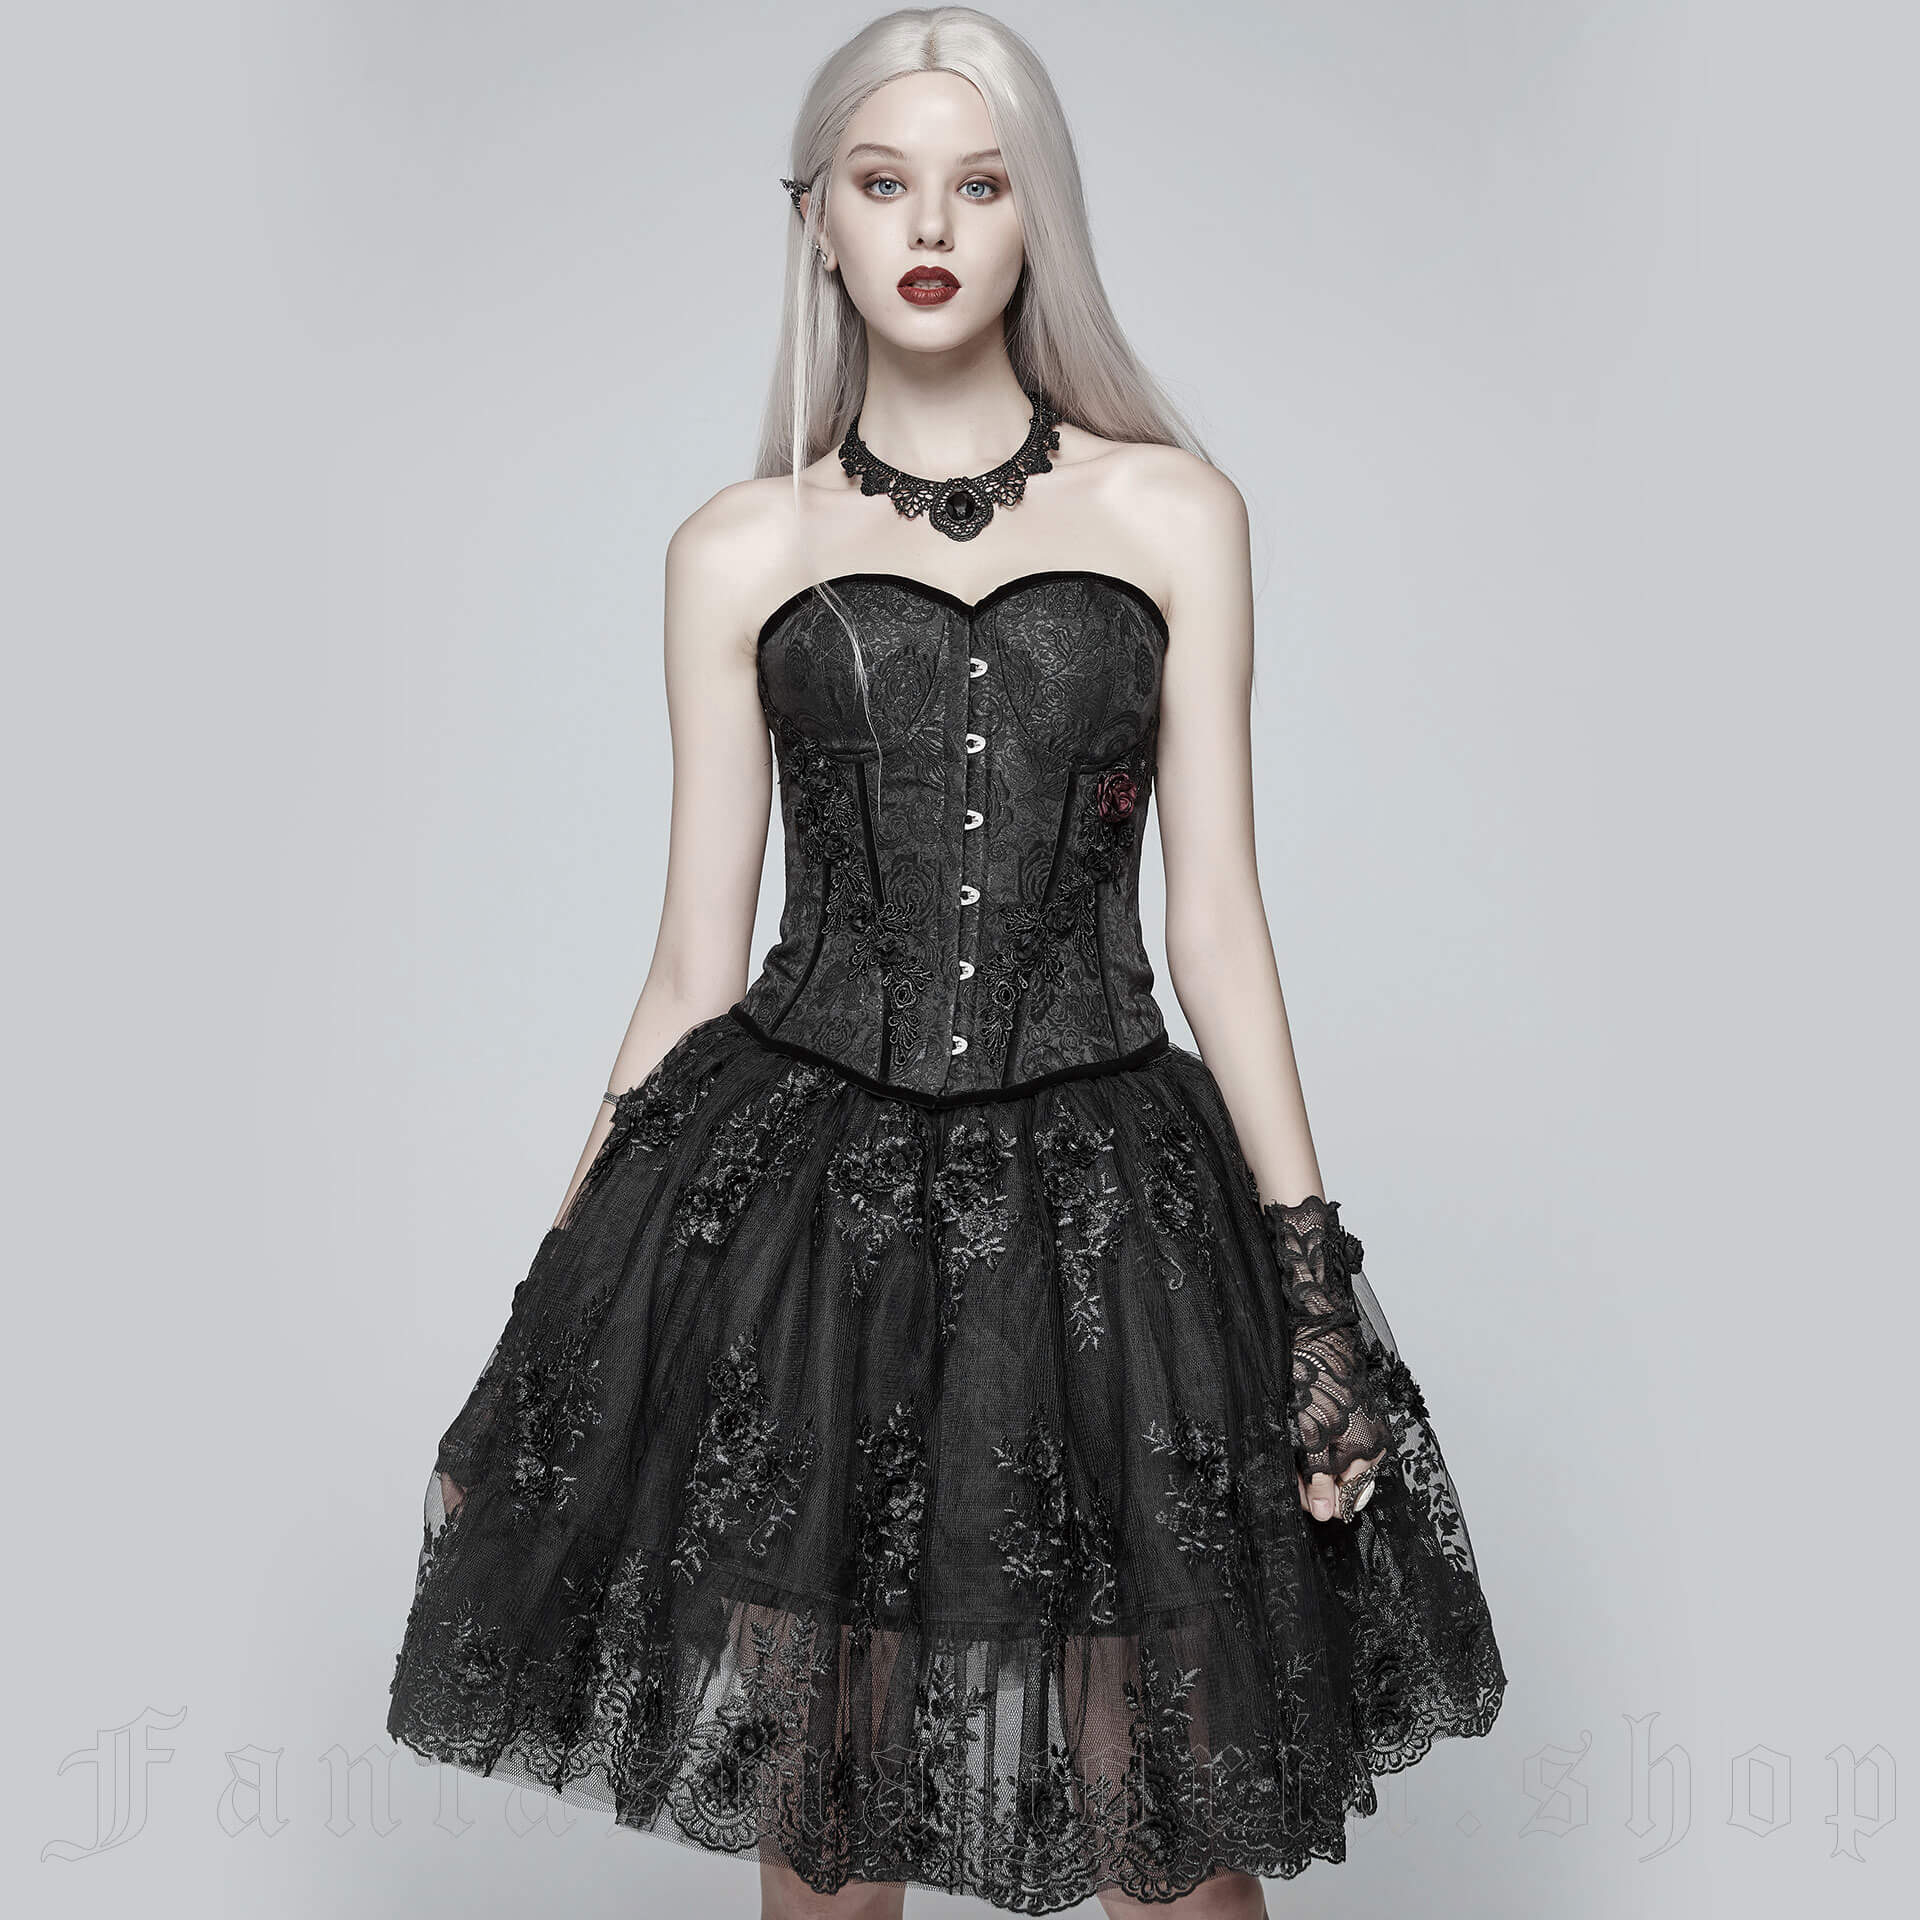 Ophelia Skirt WLQ-088 by PUNK RAVE brand